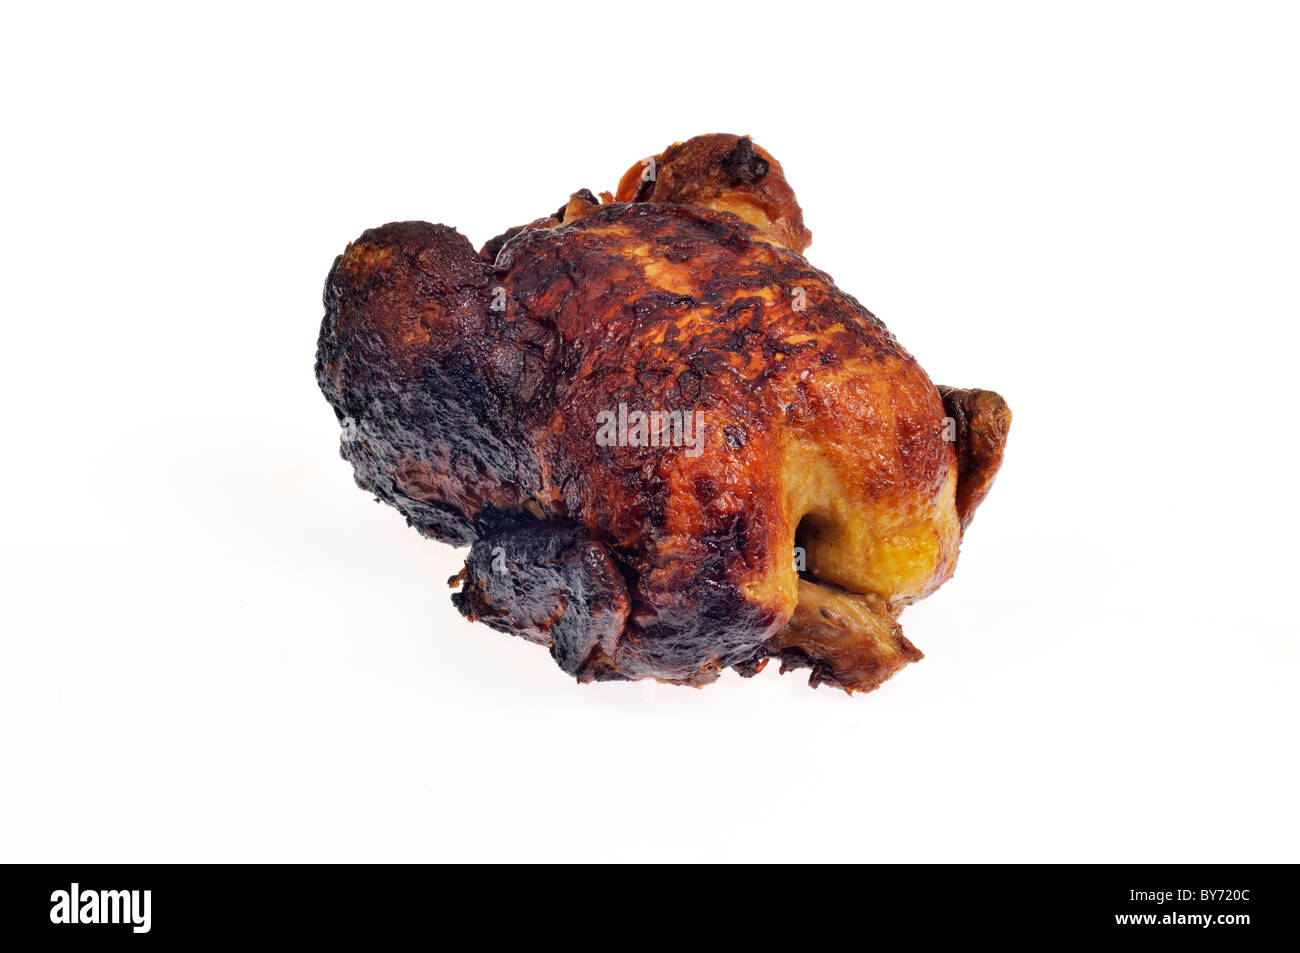 Hot cooked whole Rotisserie roasted chicken on white background, cutout. Stock Photo